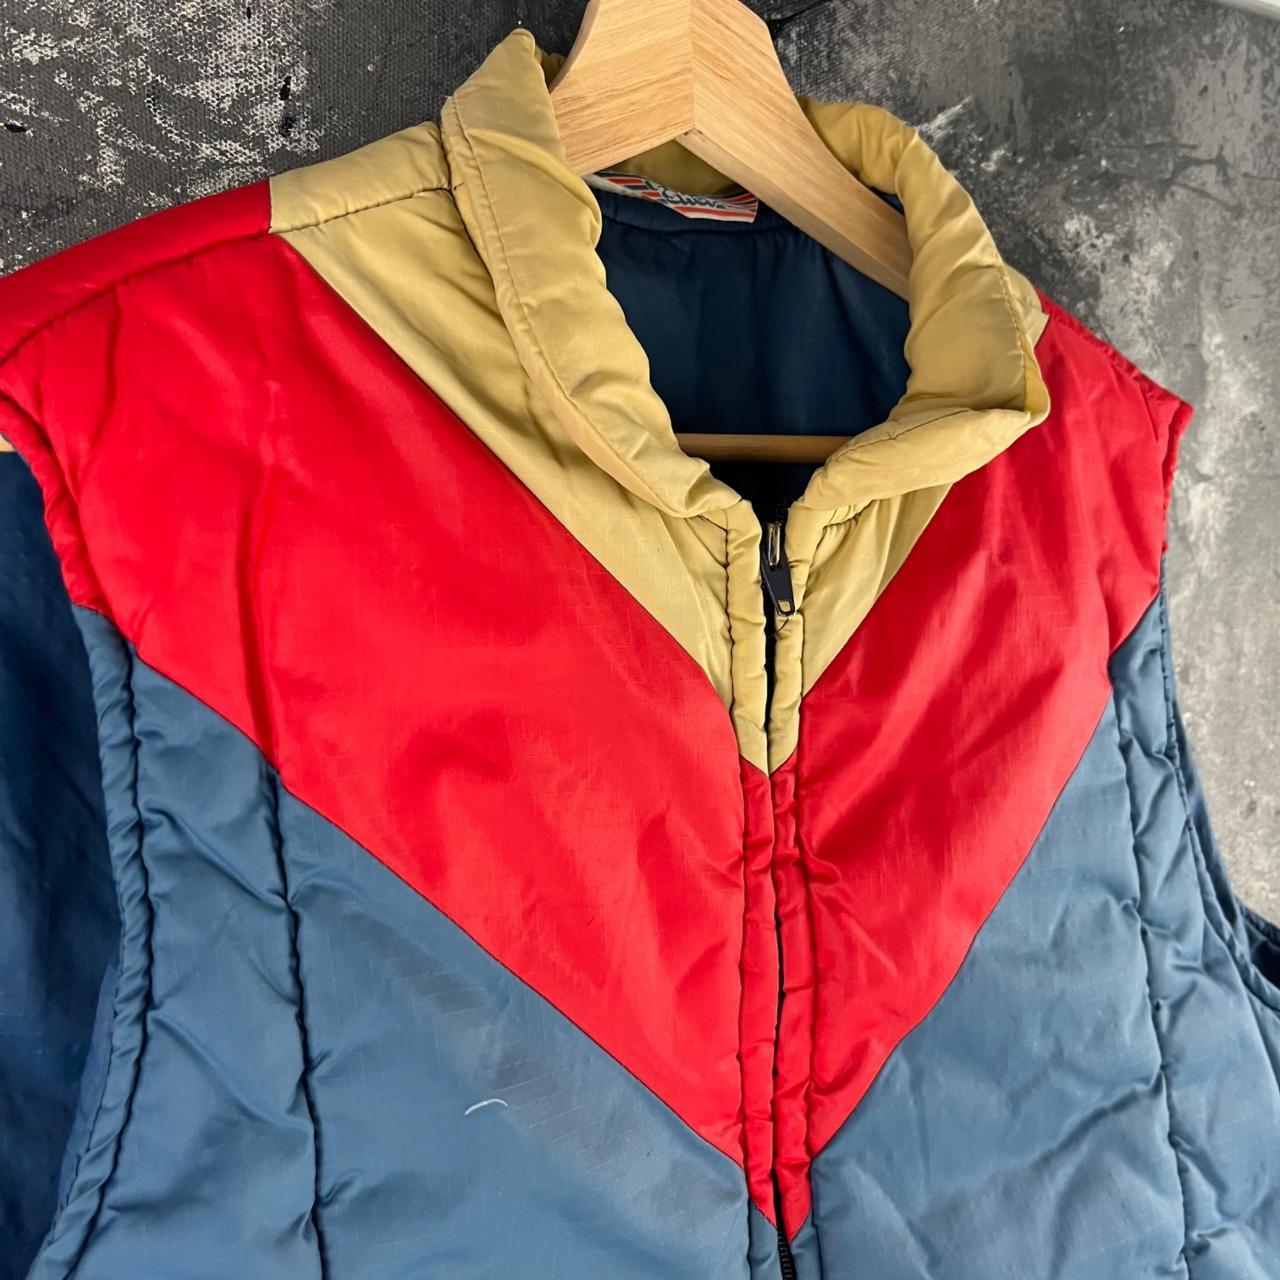 Vintage 80’s Sears puffer vest, Great colors, Fits...